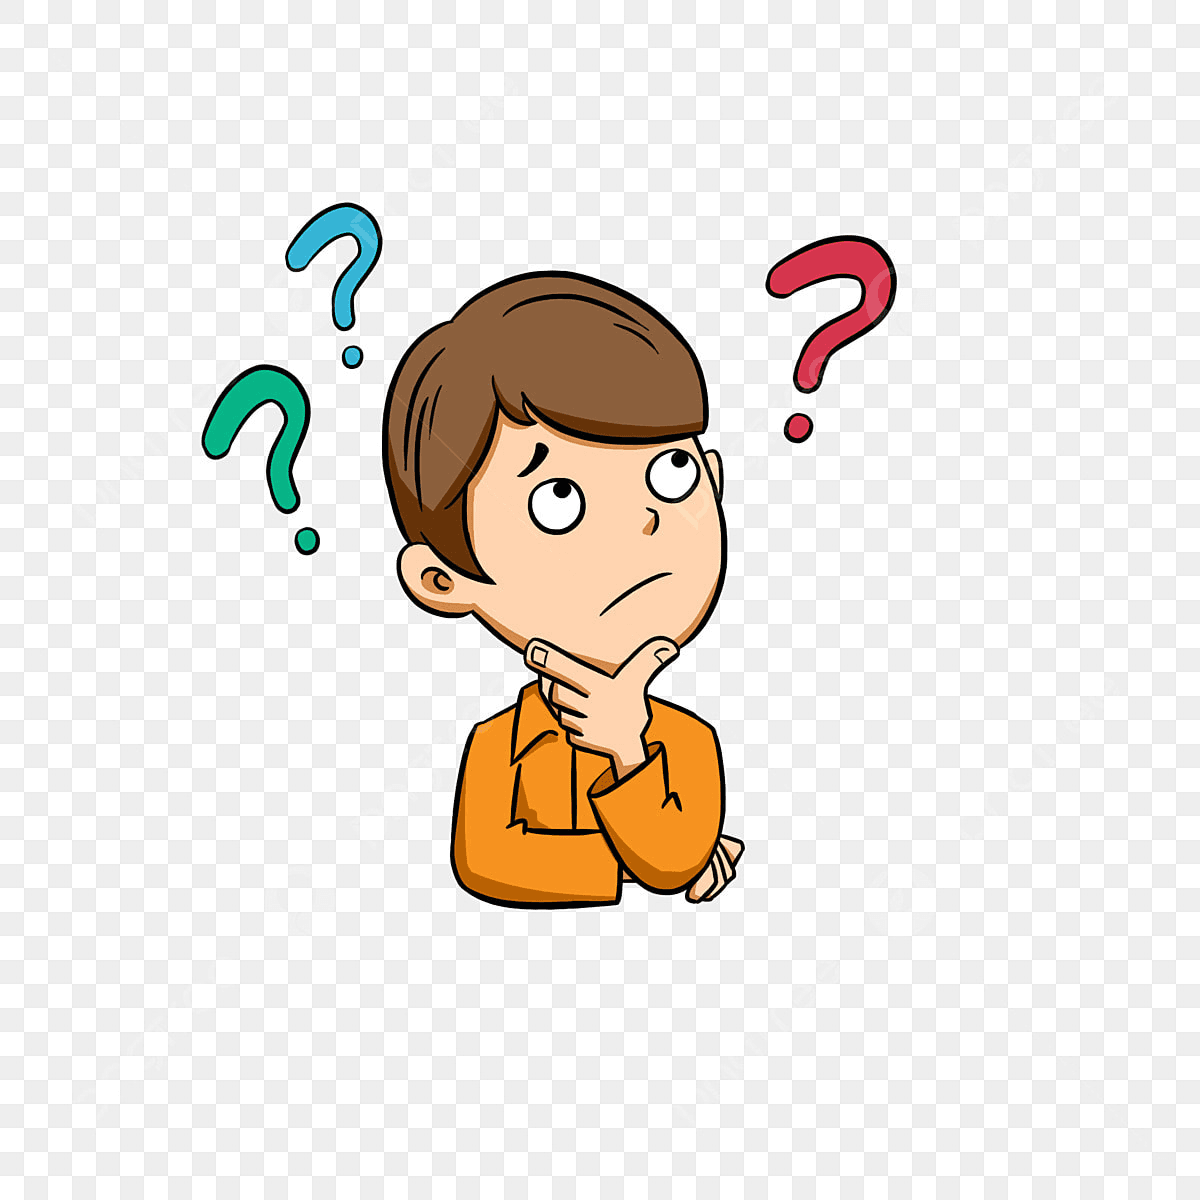 pngtree-hand-drawn-cartoon-boys-question-free-map-png-image_4582702